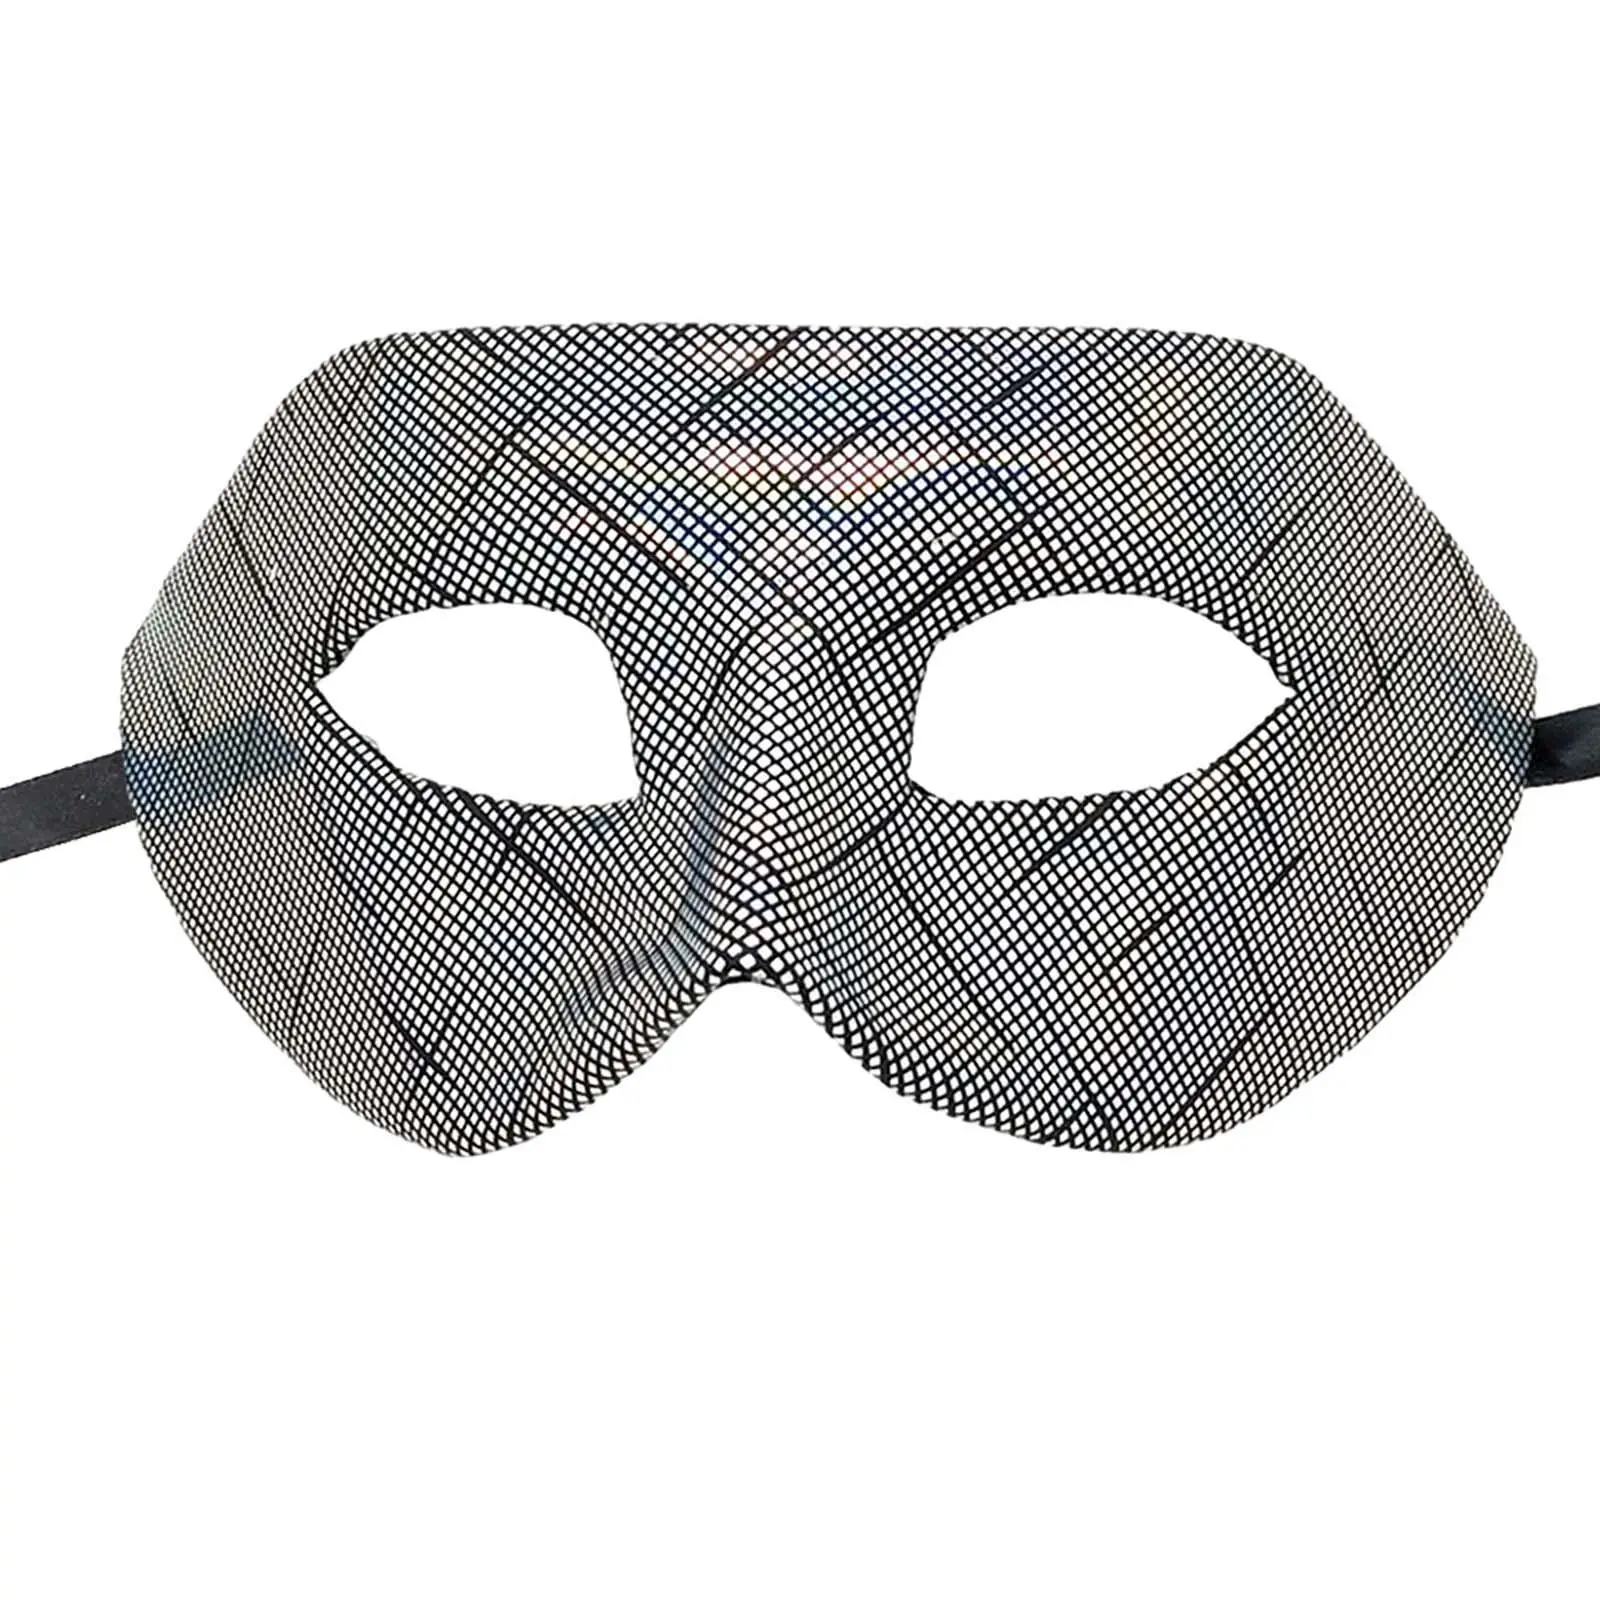 Masquerade Mask Costume Accessories for Stage Performance Halloween Dress up